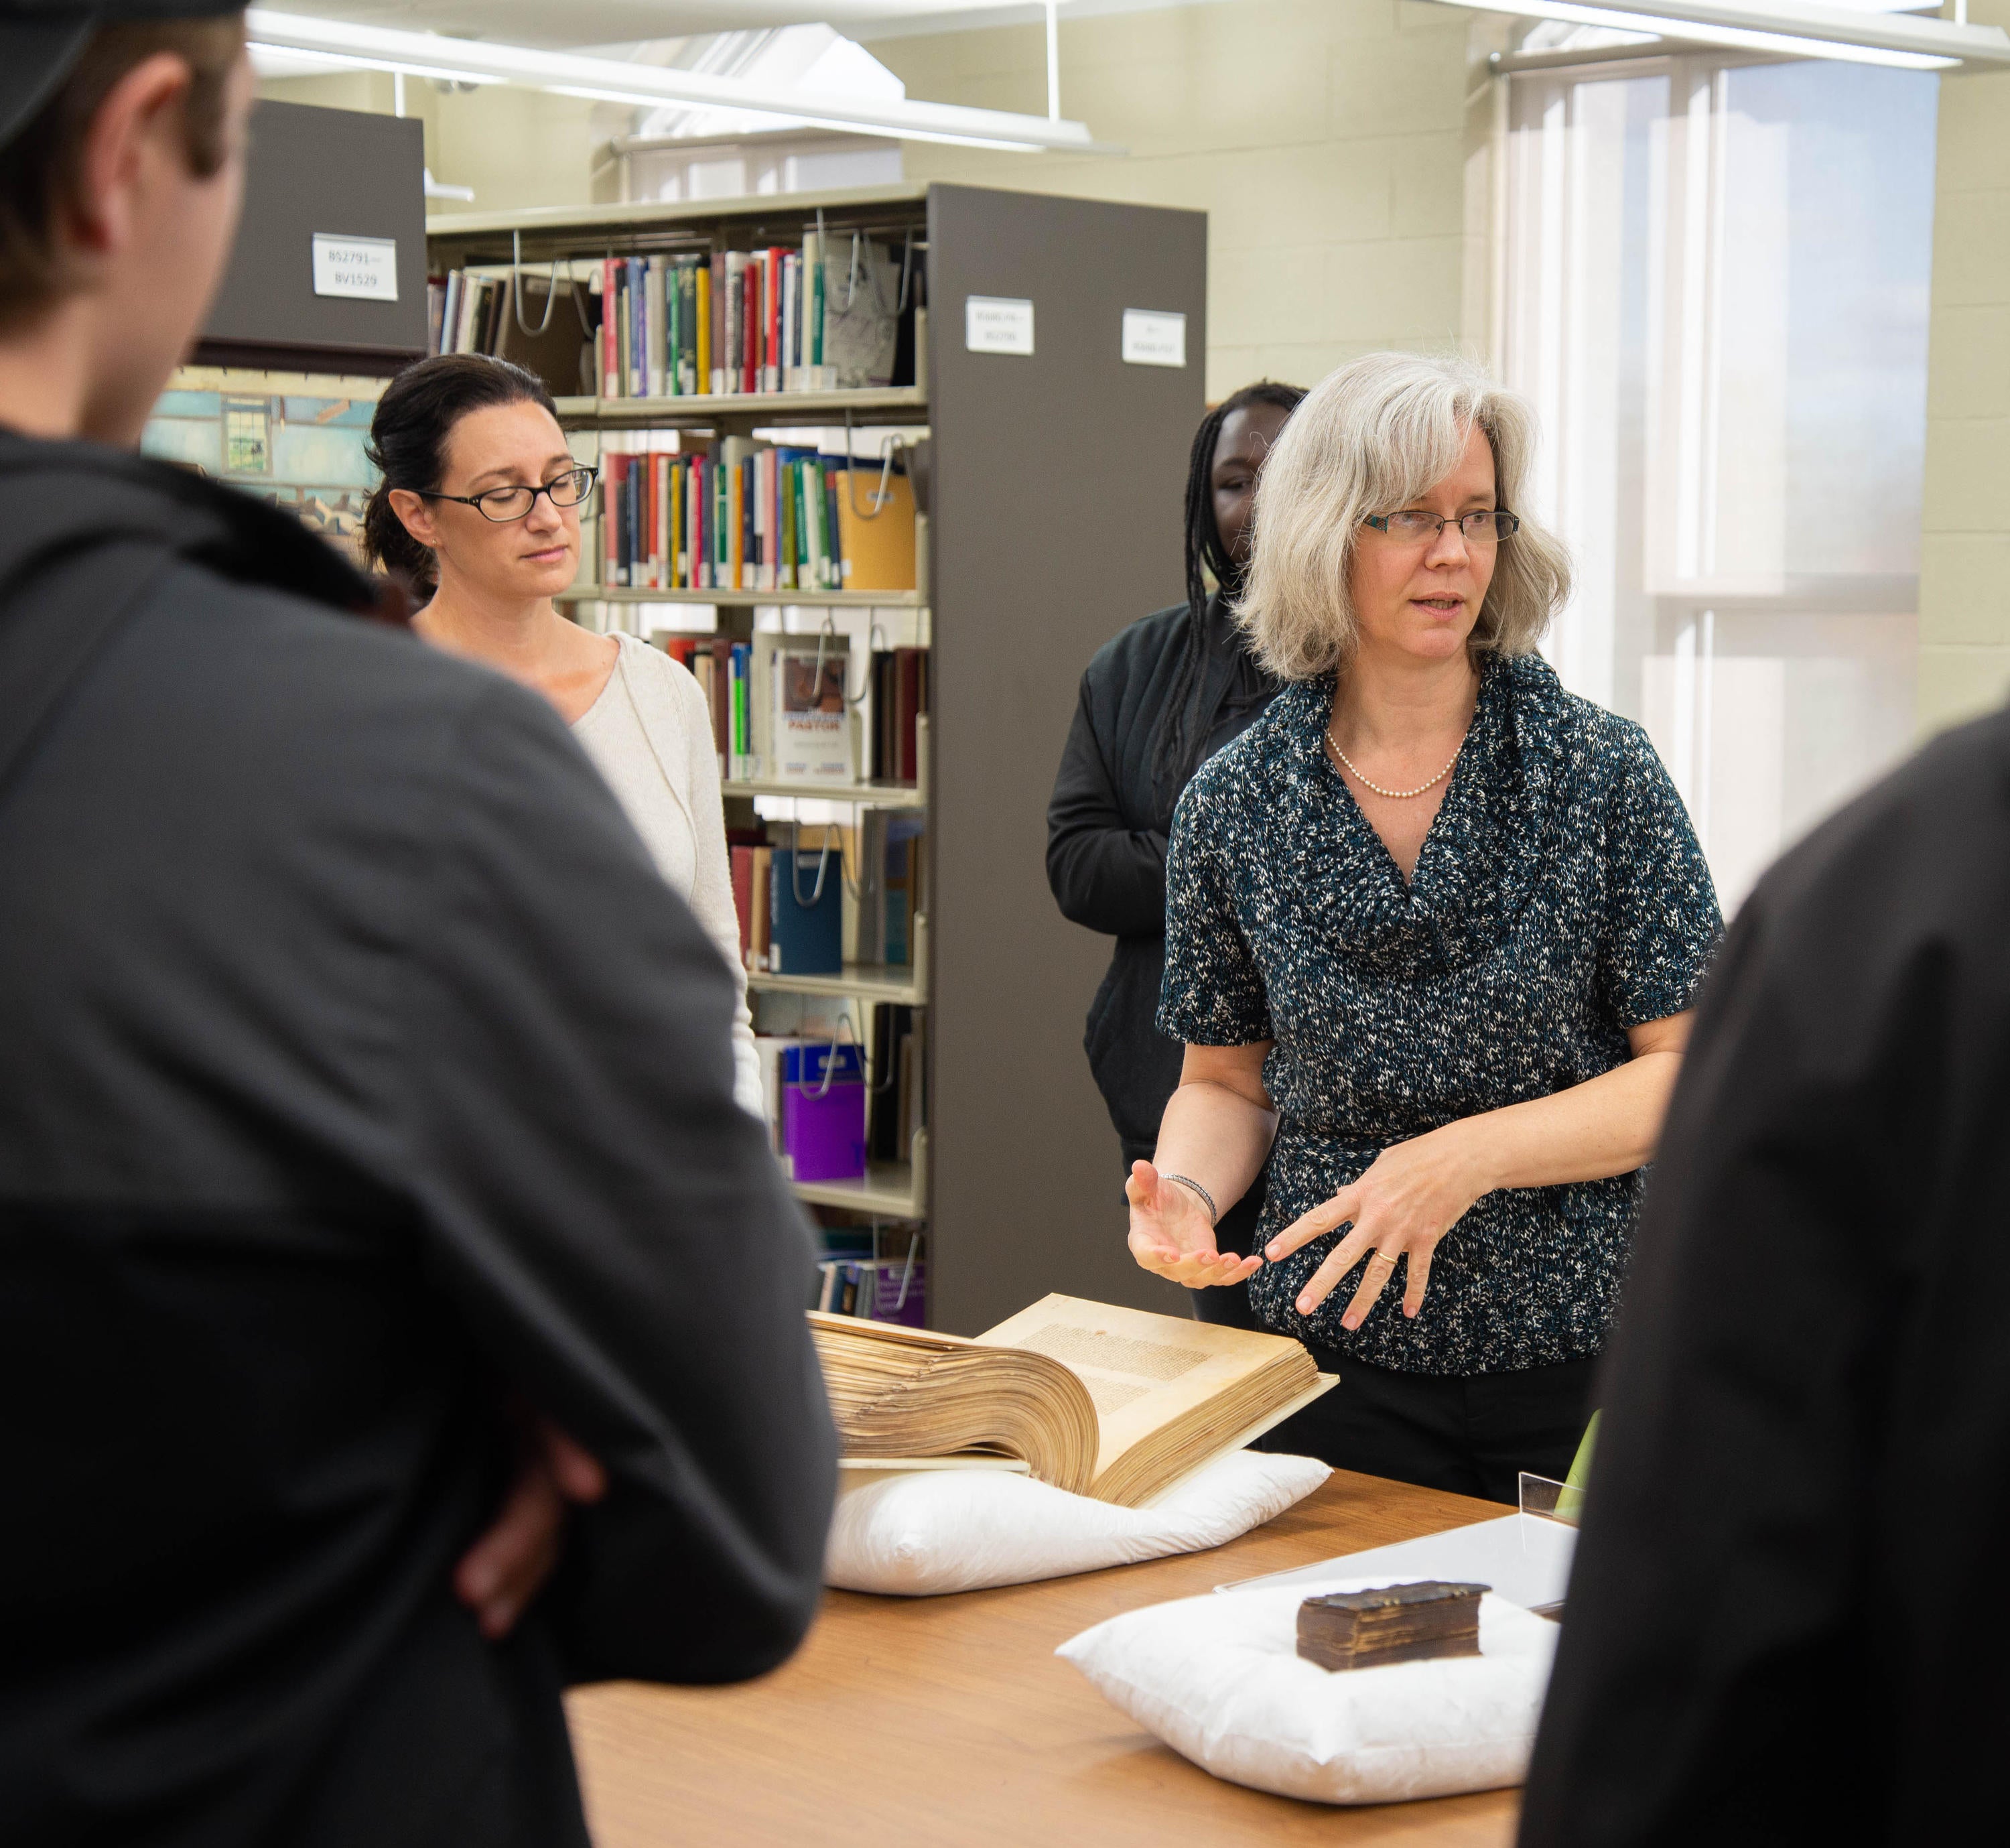 Archivist-Librarian Laureen Harder-Gissing illustrates the history of book technology with a large 13th-century manuscript Bible and tiny 17th-century printed Dutch hymnal.